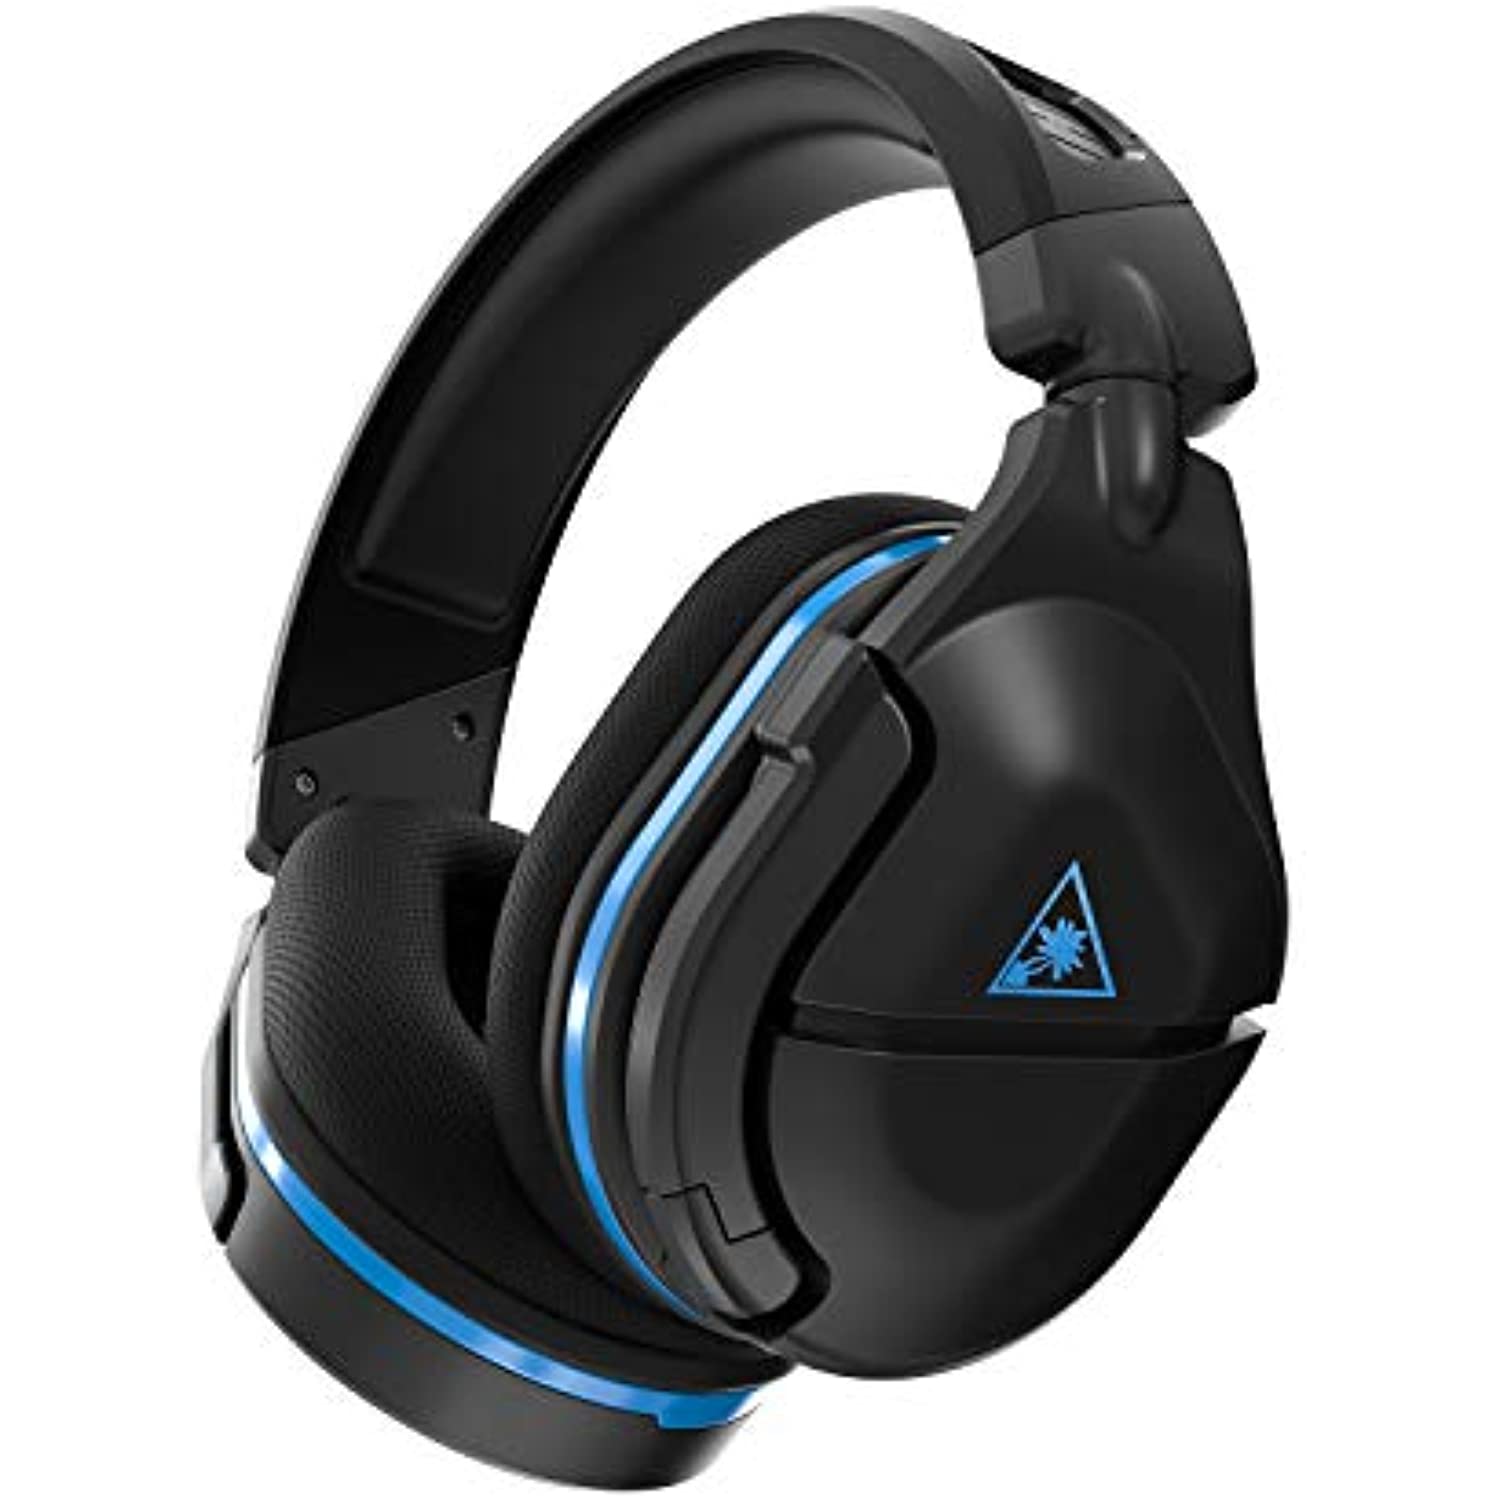 Turtle Beach - TBS-3140-01 Stealth 600 Gen 2 Wireless Gaming Headset for PlayStation 5 PS5 PlayStation 4 PS4 & Nintendo Switch - Black/Blue